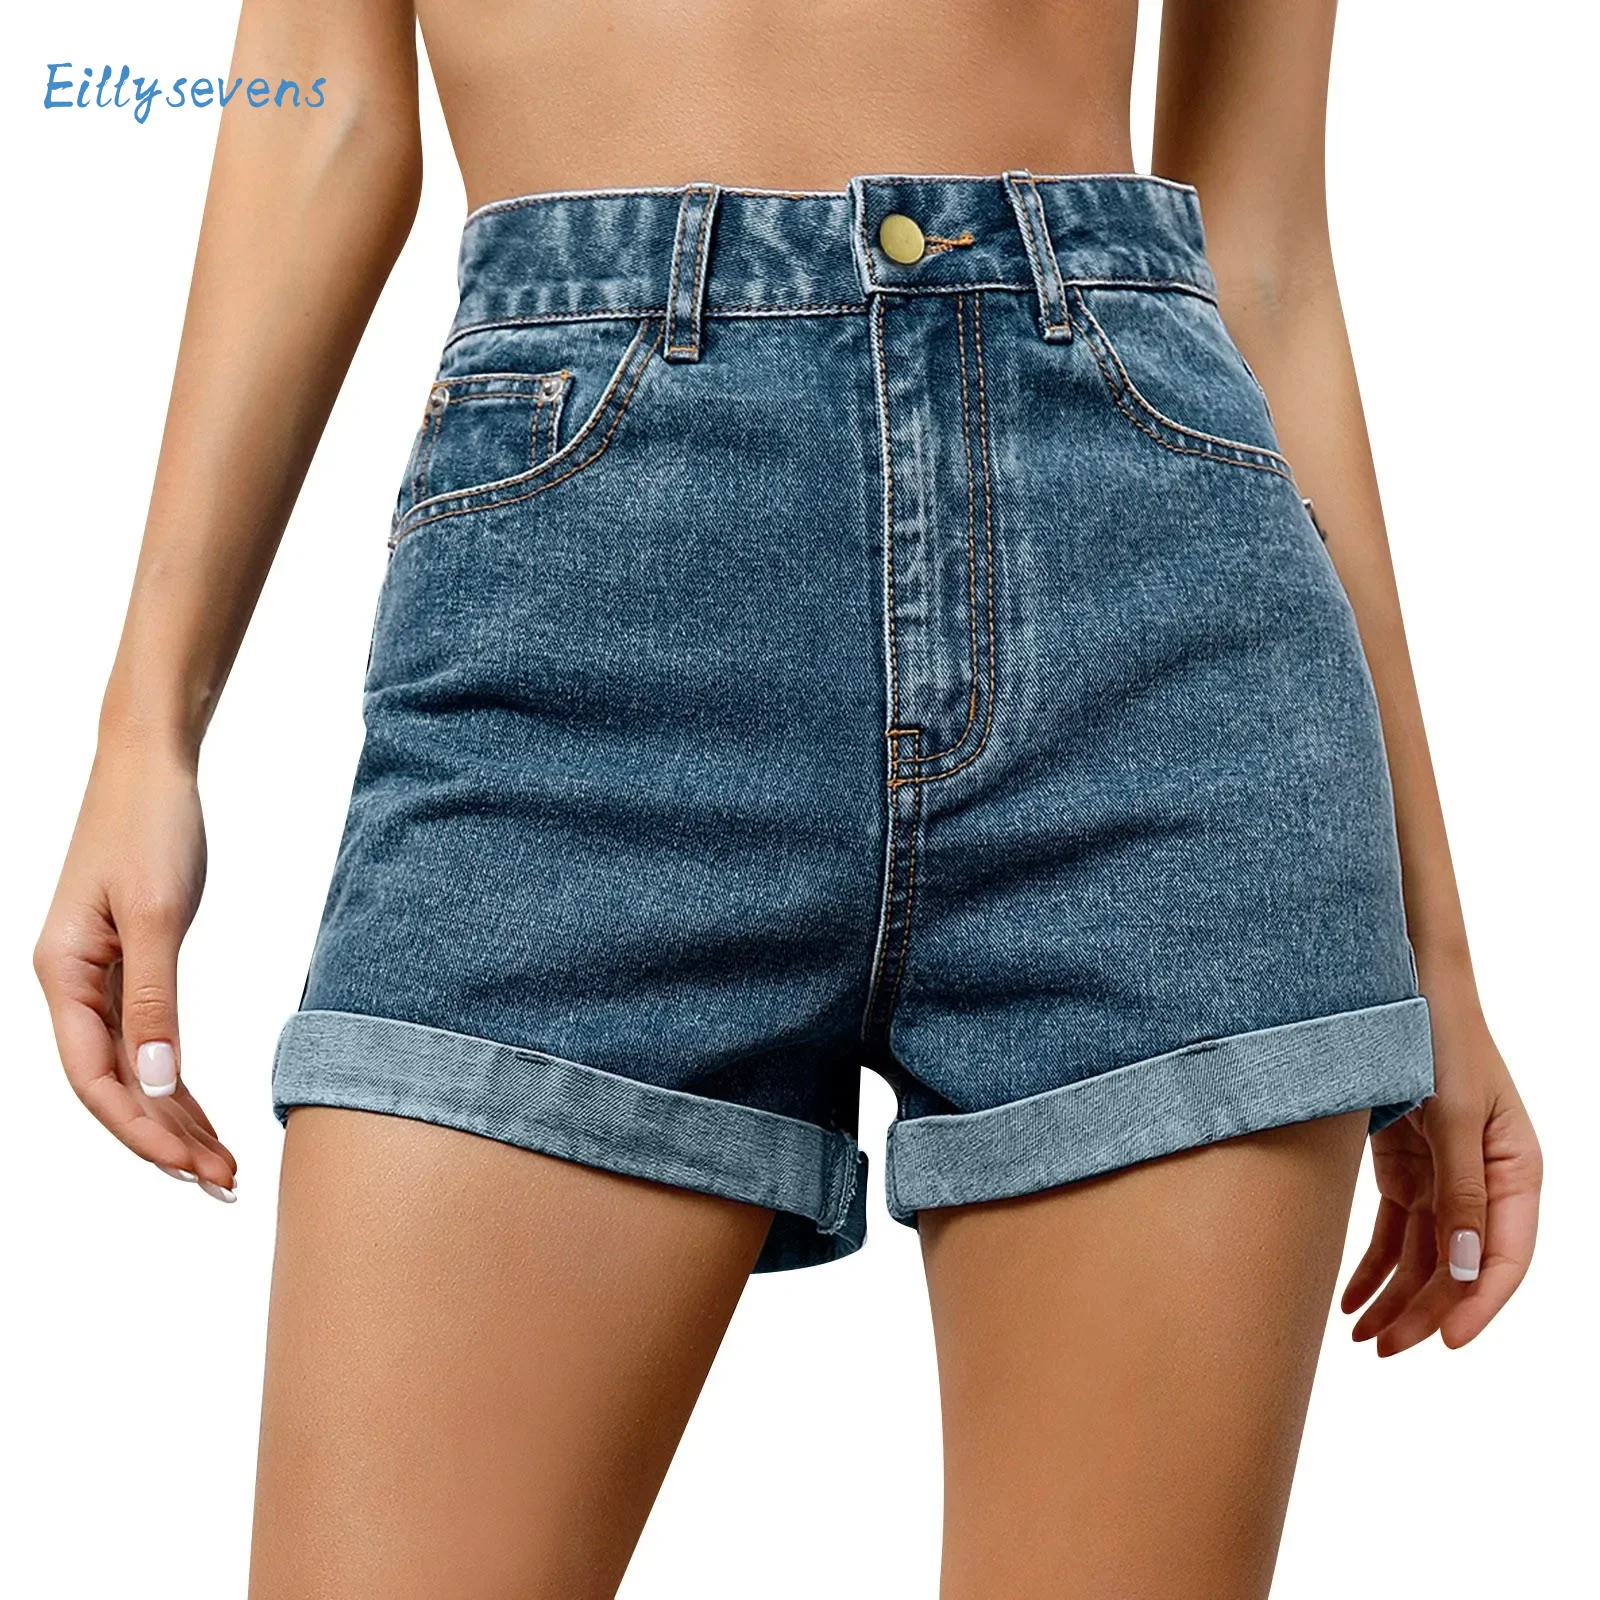 

Ladies New Denim Shorts Casual Fashion High Waist Denim Shorts With Pockets Trend Street Style Daily All-Match Rolled Hem Shorts